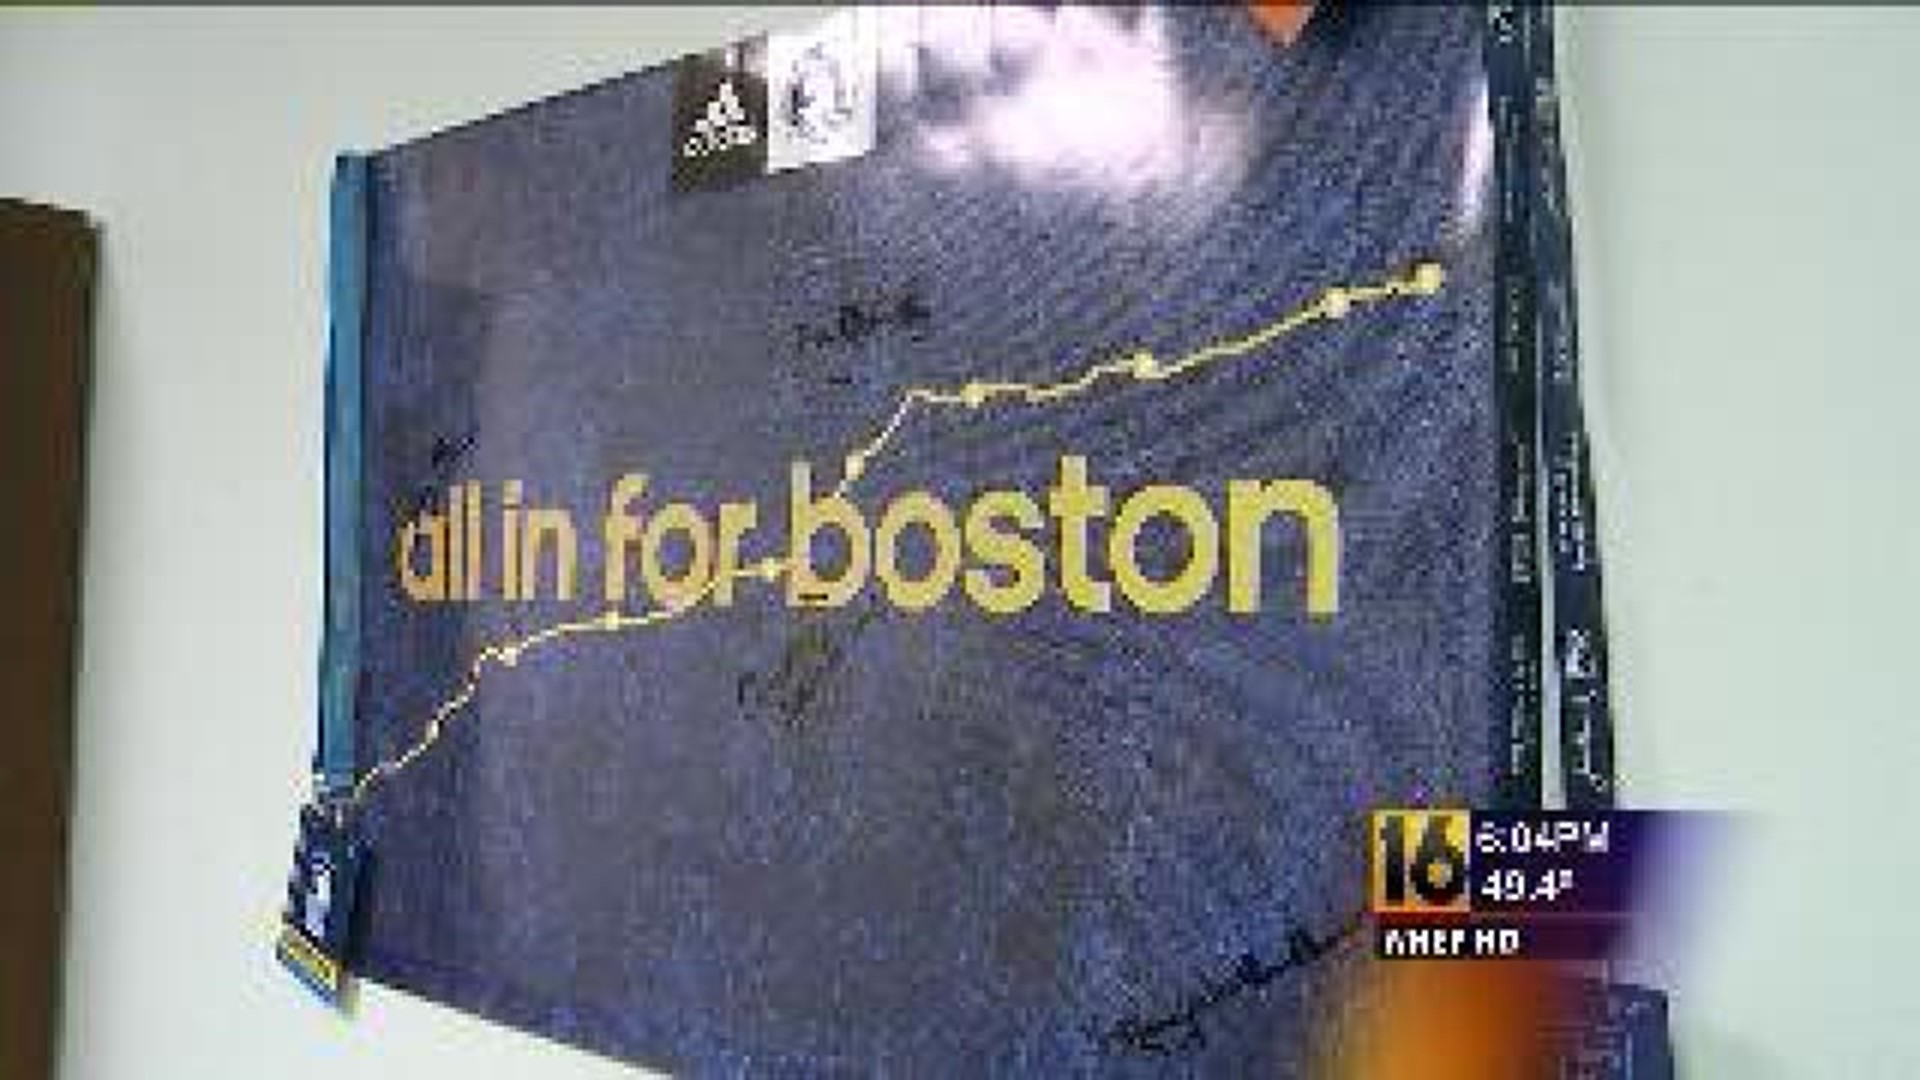 Affected Runners in Boston Bombings Looking to Give Back